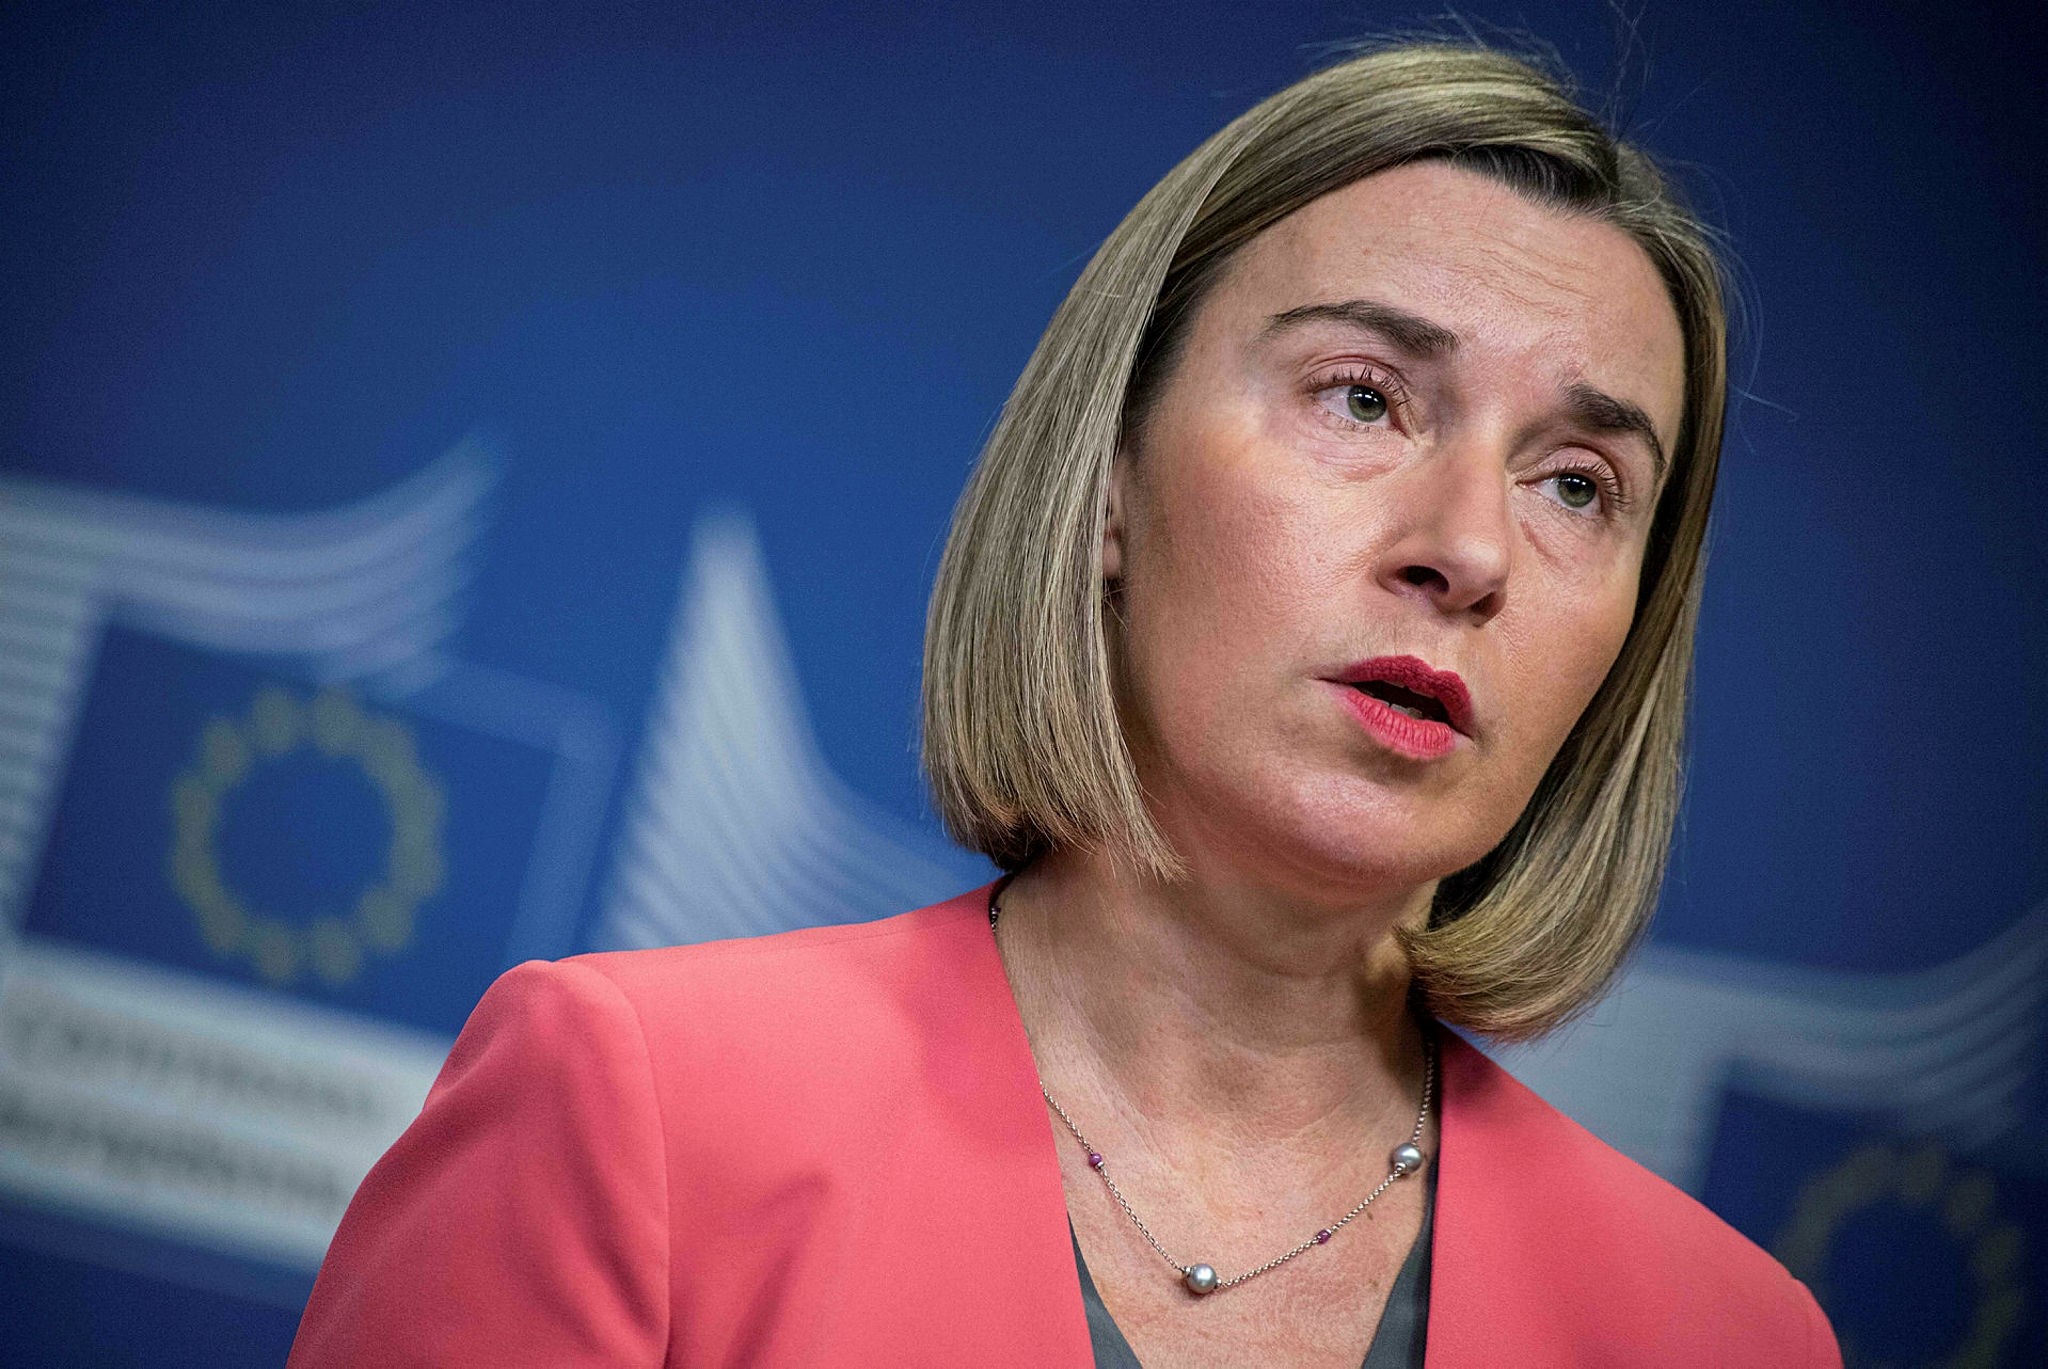 EU High Representative for Foreign Affairs and Security Policy Federica Mogherini addresses a press conference after a bilateral meeting with Indonesian Foreign Minister at the European Union Commission in Brussels on December 14, 2017. (AFP Photo)